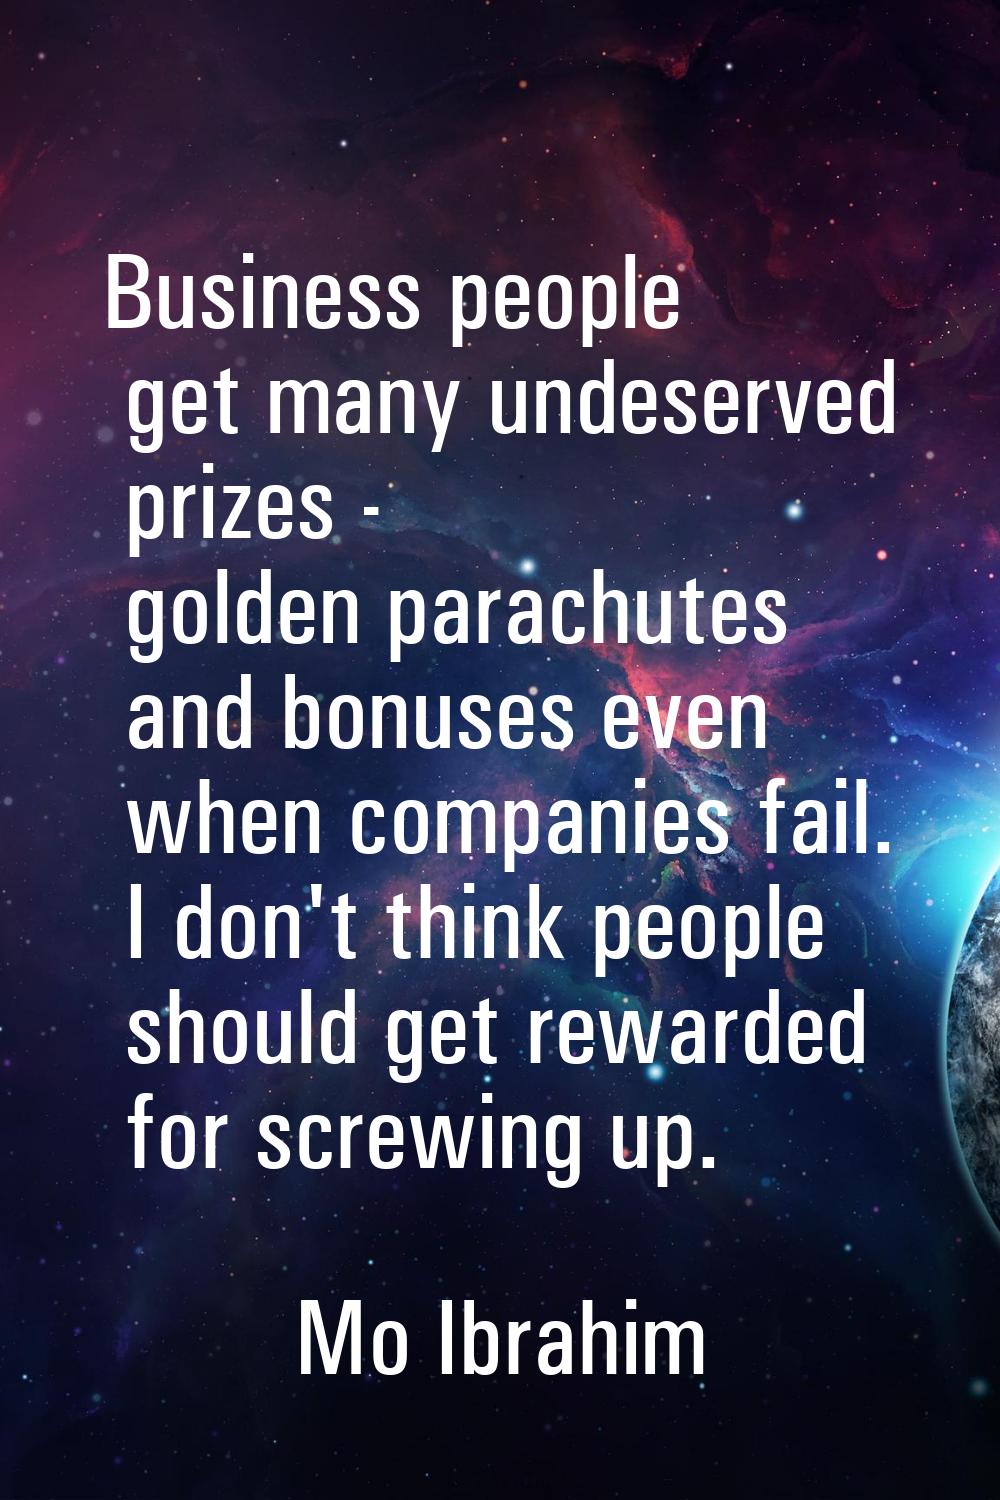 Business people get many undeserved prizes - golden parachutes and bonuses even when companies fail